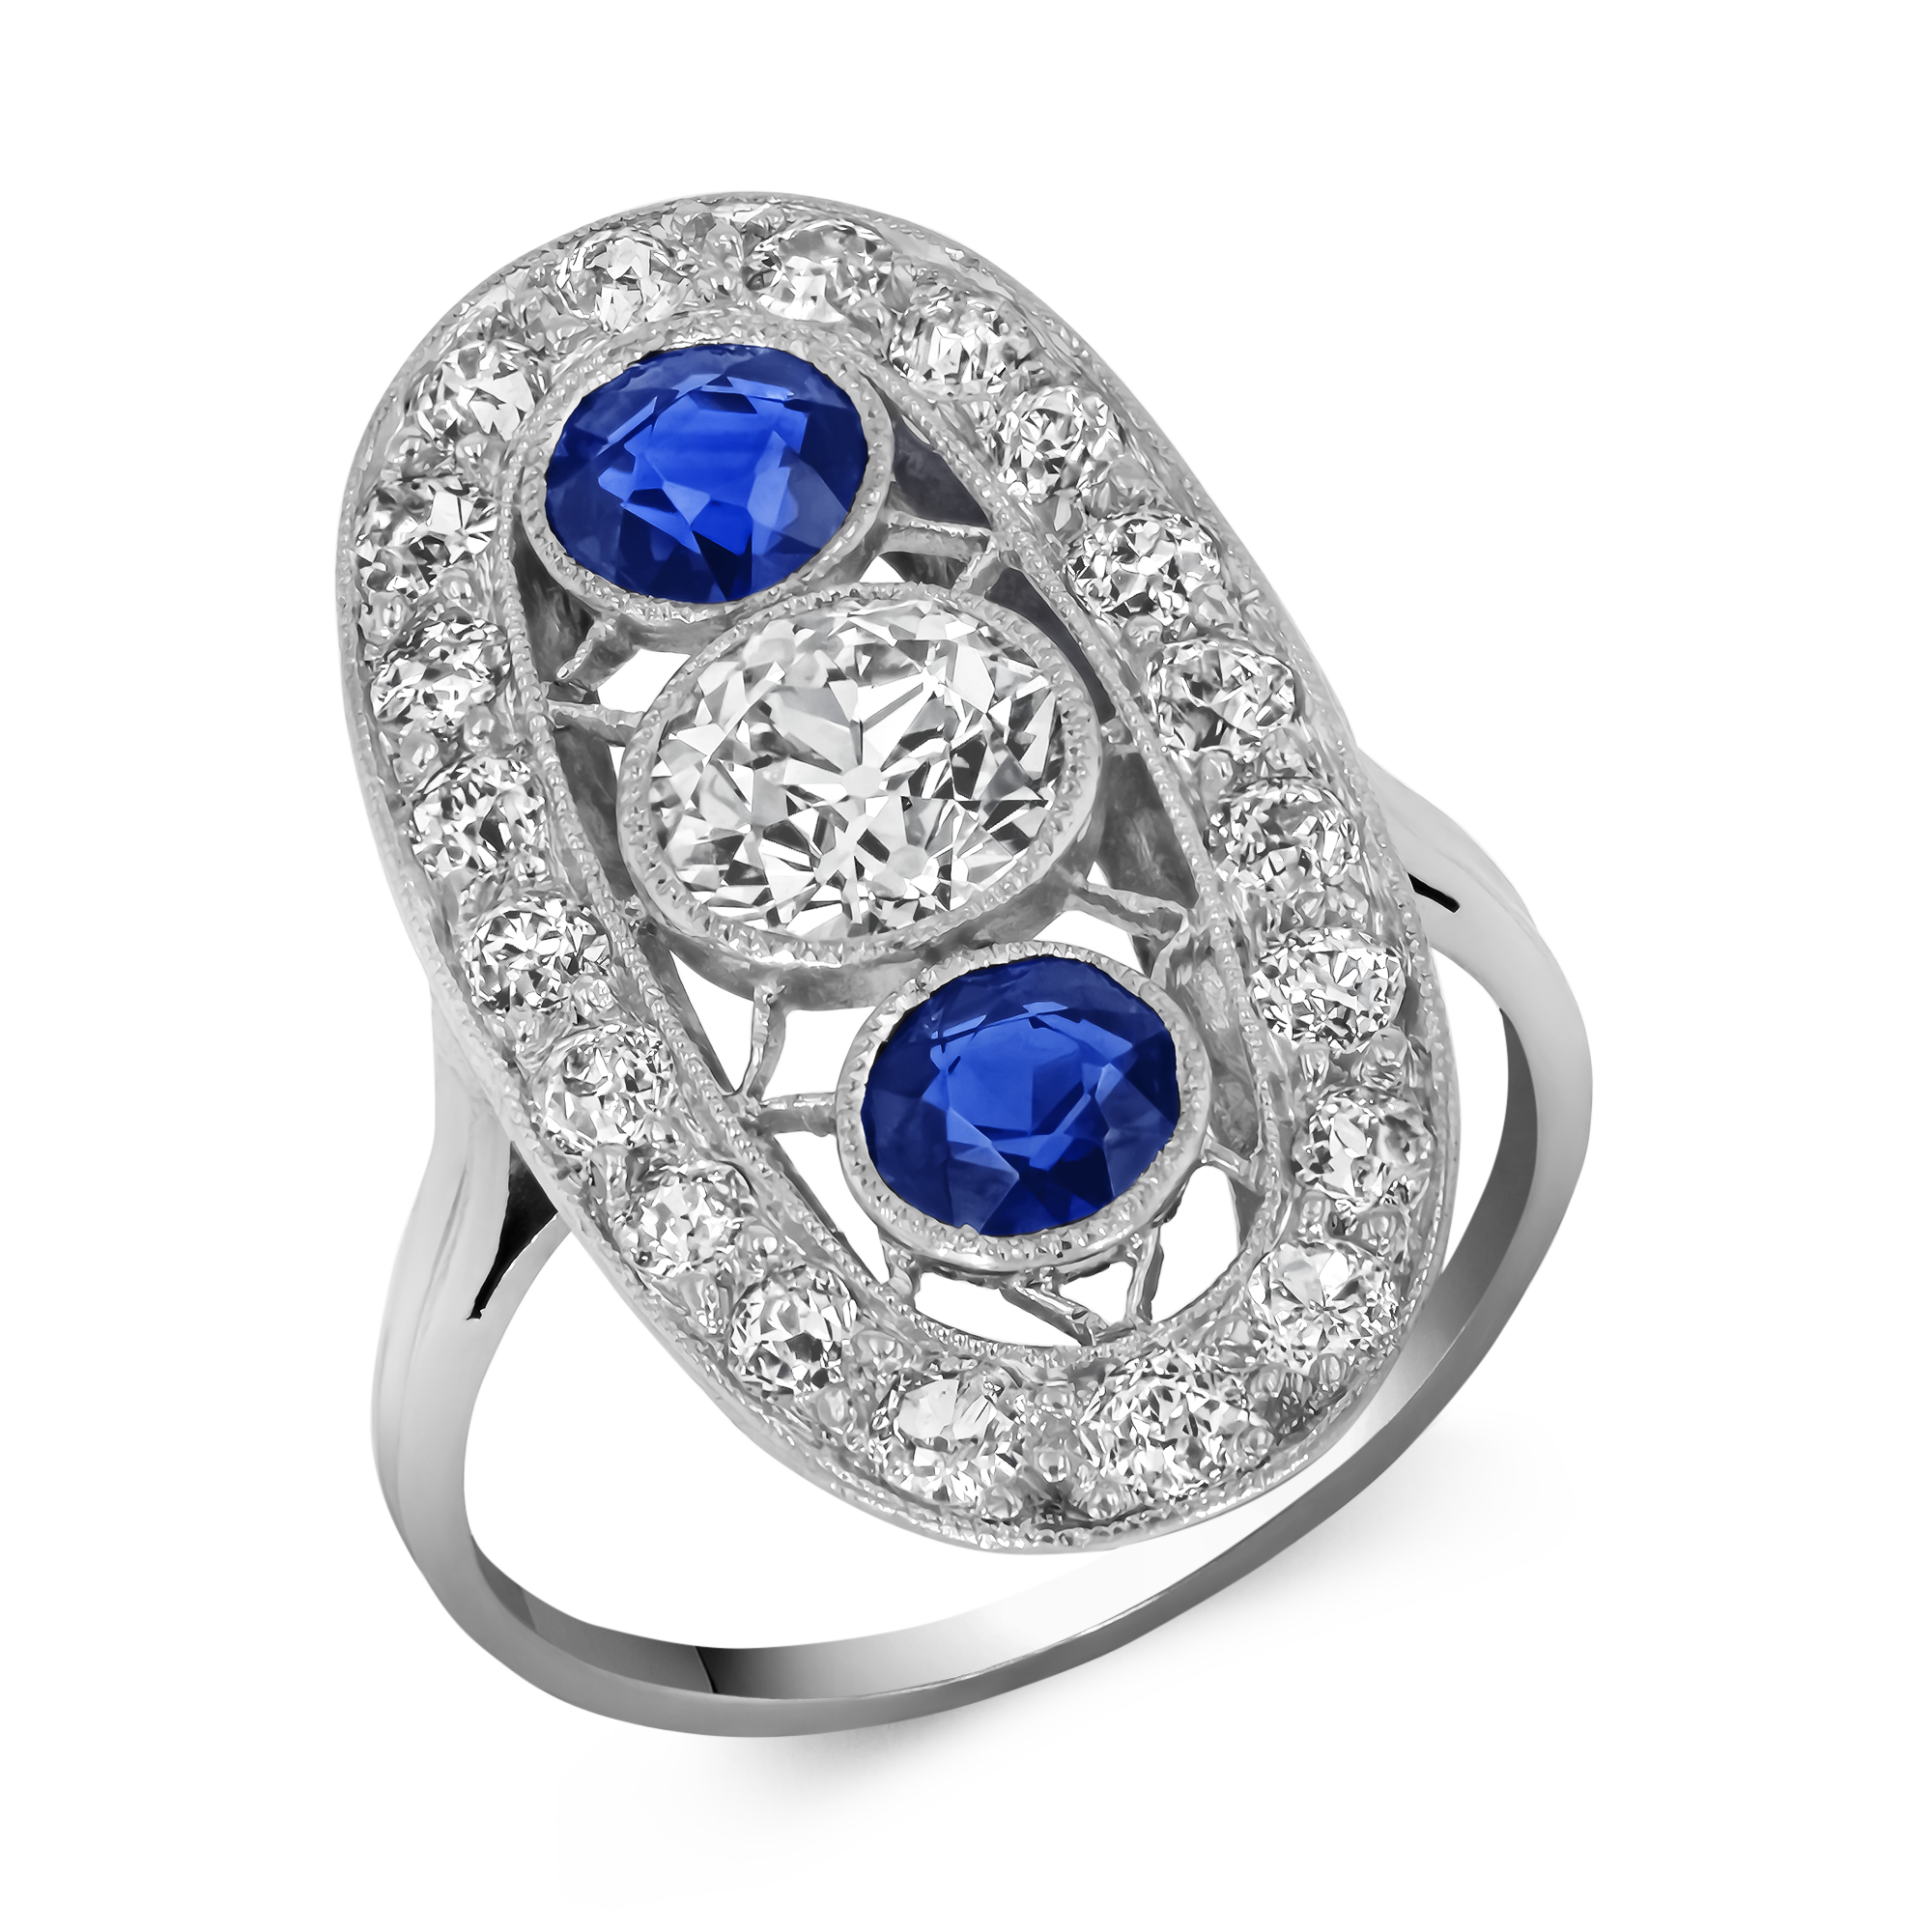 Edwardian Inspired Sapphire and Diamond Cluster Ring with Diamond Surround Brilliant Cut, Millegrain Set_1